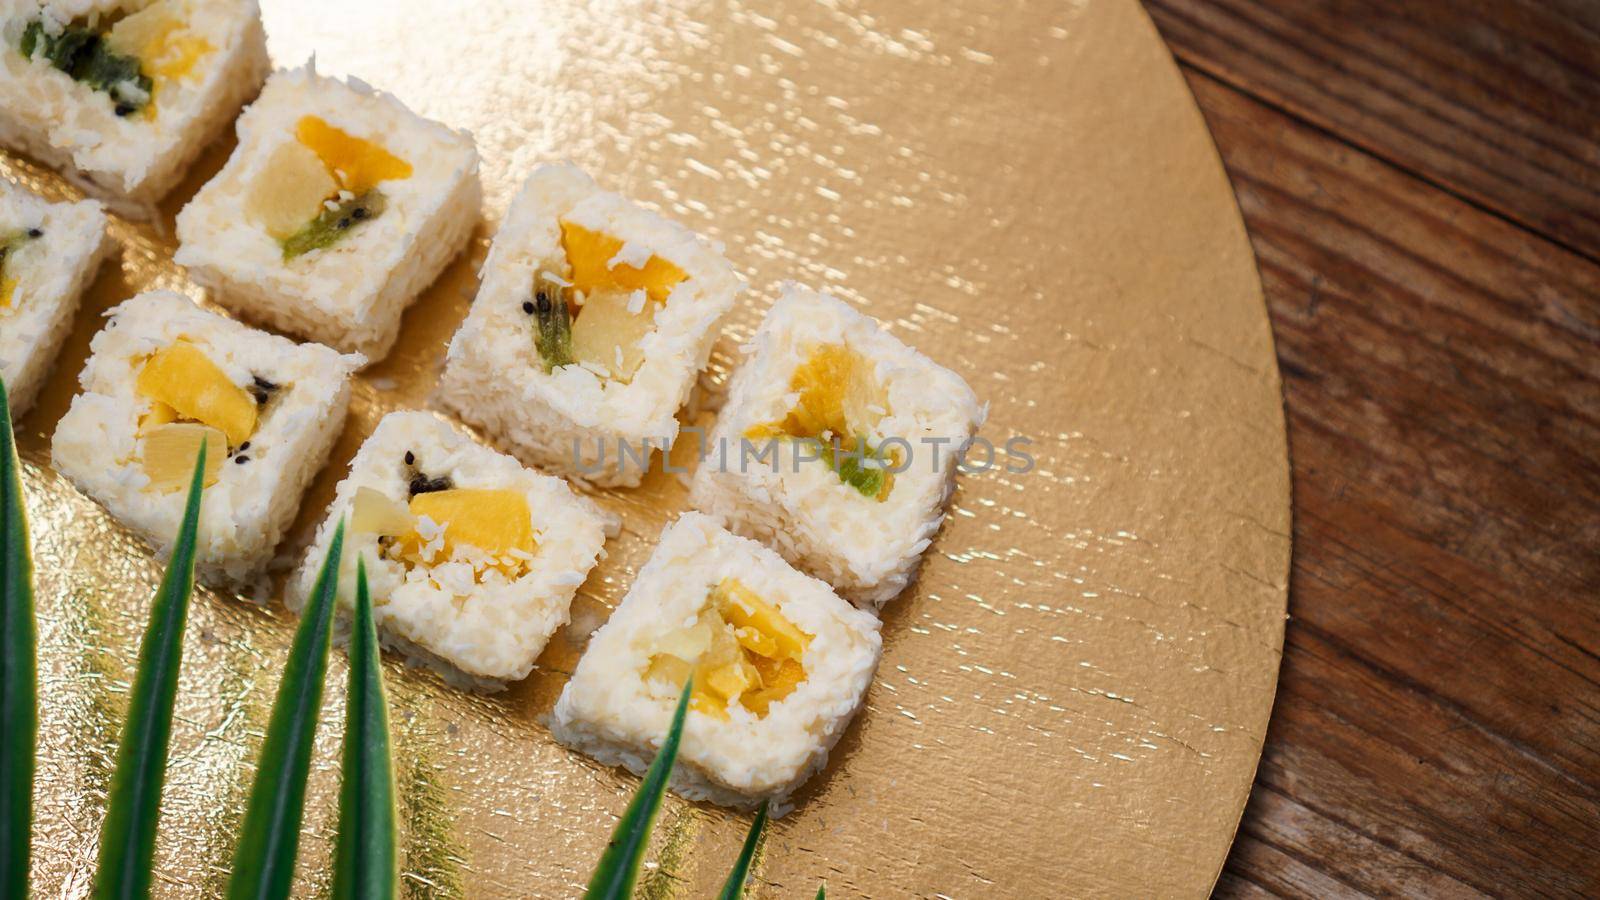 Dessert Sushi - Roll with Various Fruit and Cream Cheese inside. On a gold background and with a tropical leaf